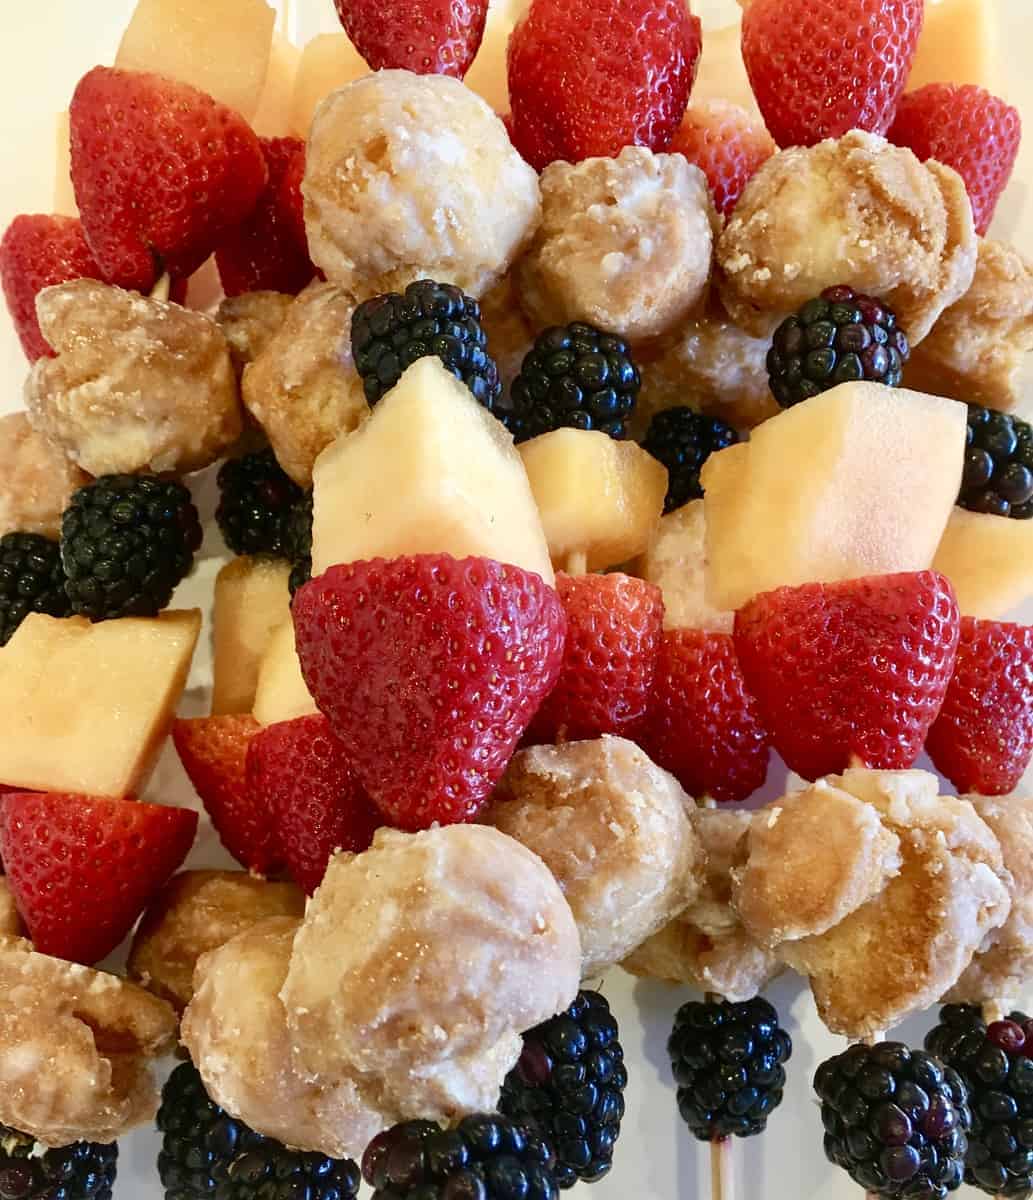 Donut and Fruit Kabob Skewers with strawberries, blackberries, and cantaloupe for a baby shower menu